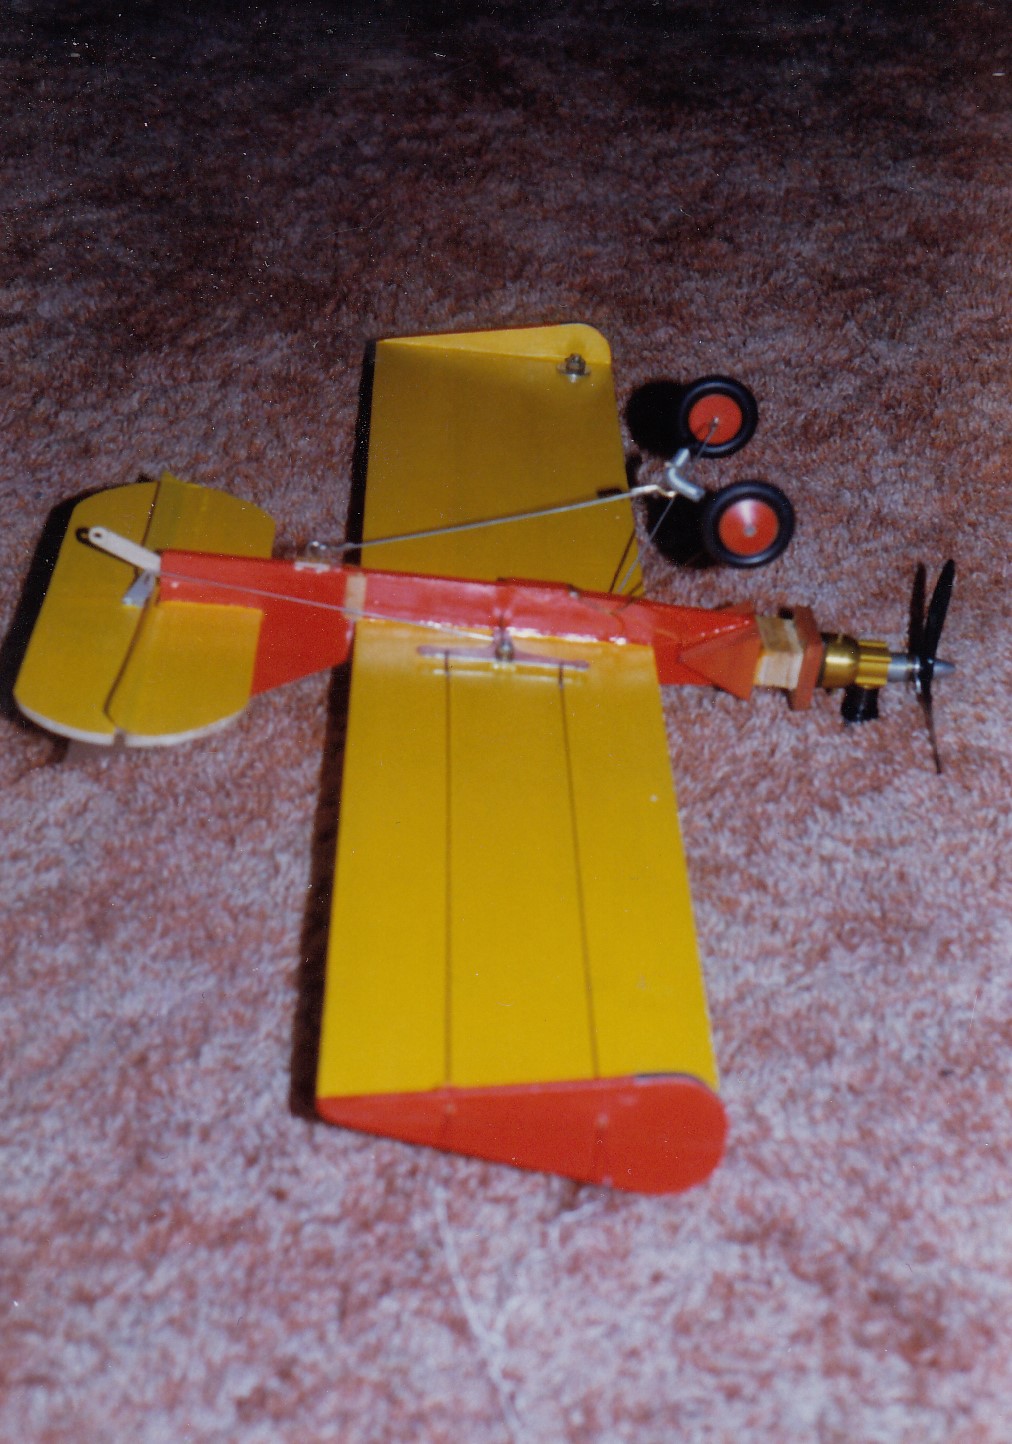 what airplanes have you built? post your pics of the models and feel free to talk about your airplanes - Page 5 Skywal12